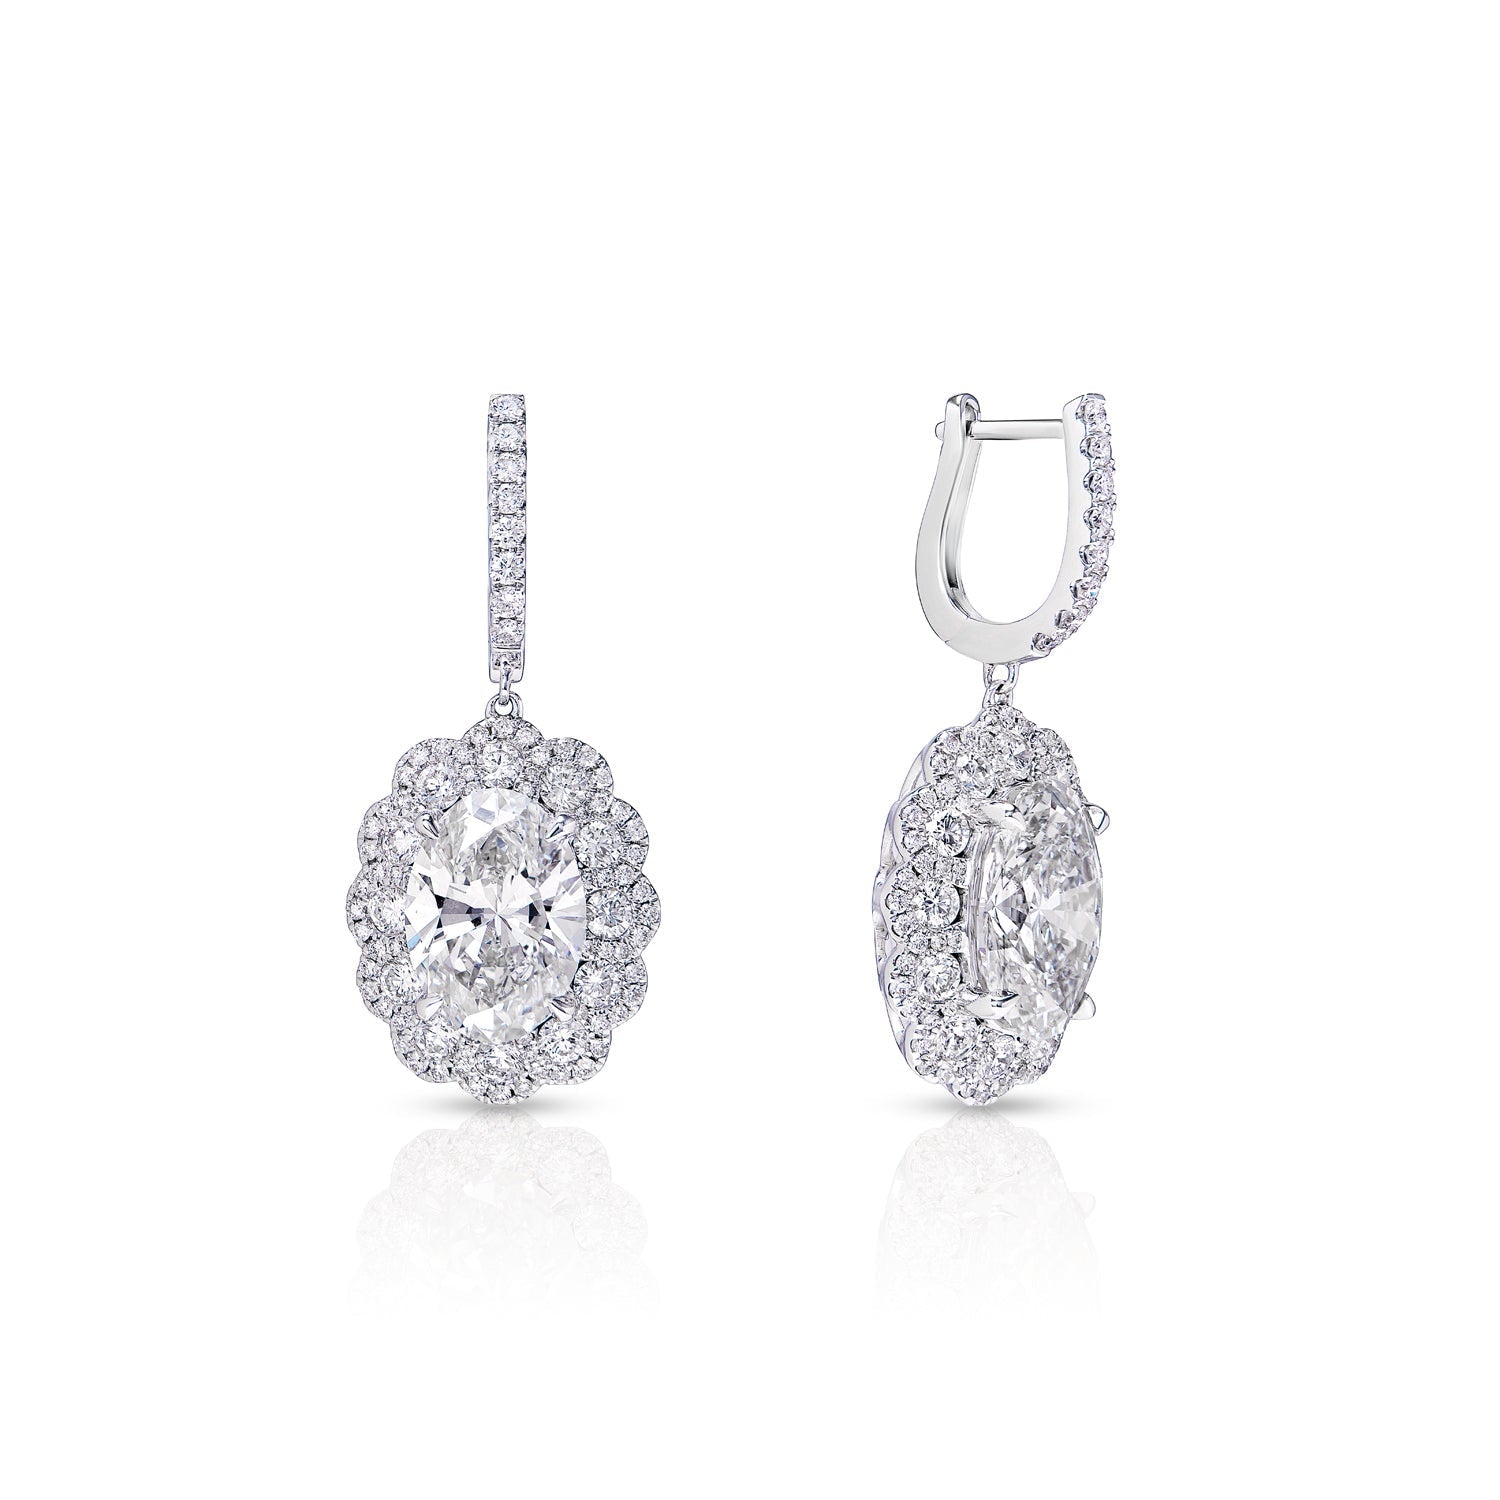 Luanna 11 Carat I VS1 Oval Cut Lab-Grown Halo Diamond Hanging Earrings in 18k White Gold Front and Back View